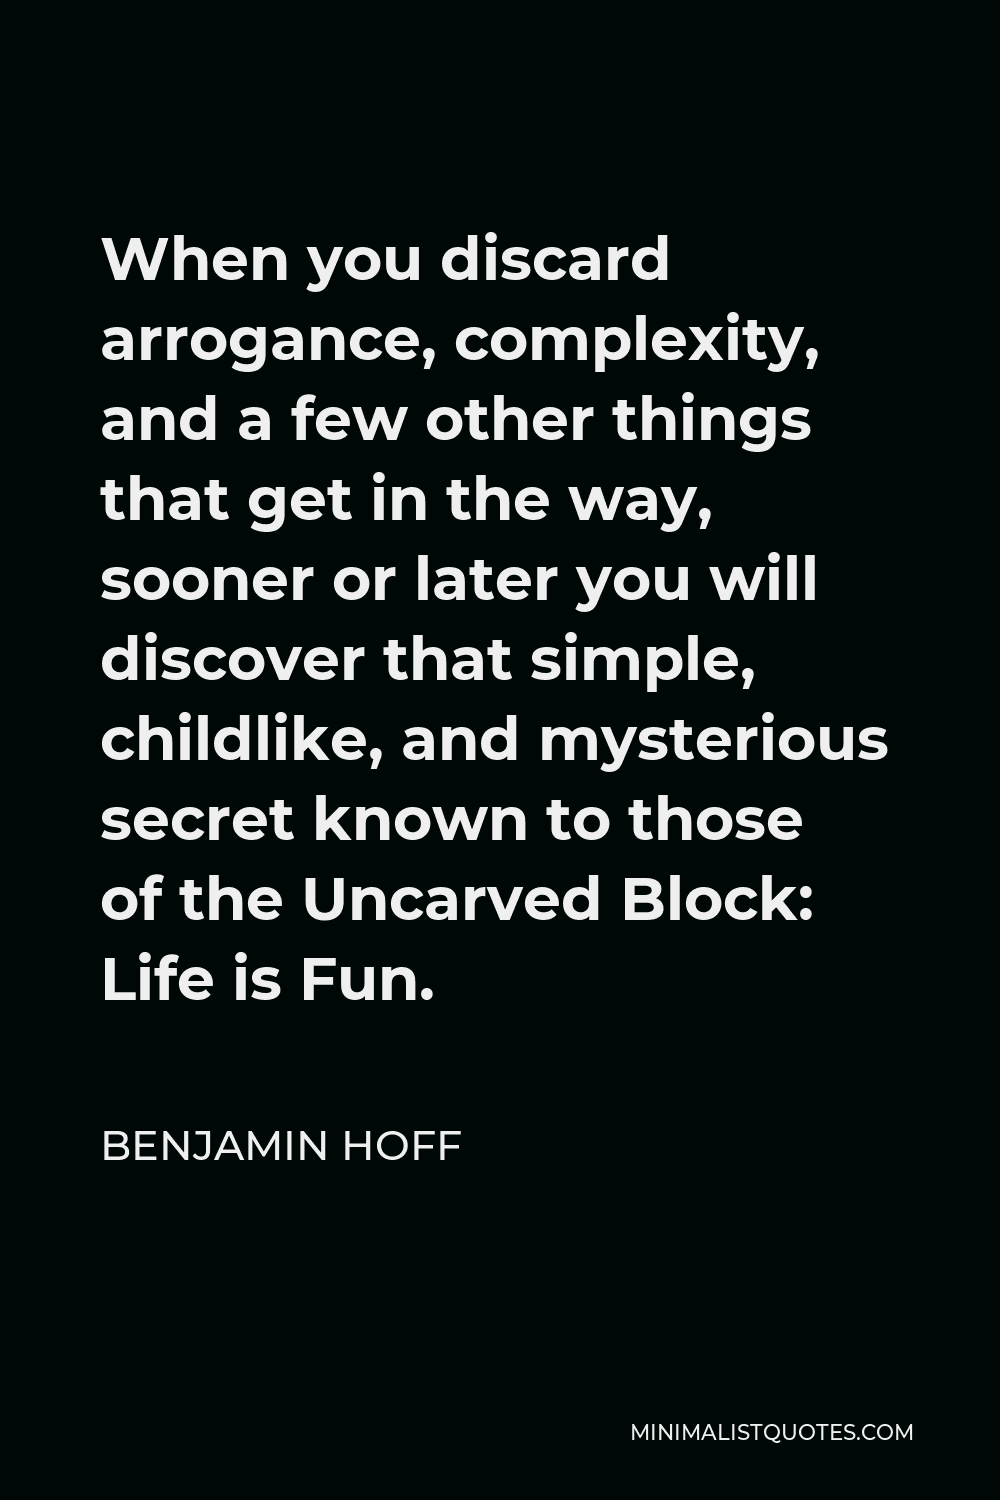 Benjamin Hoff Quote - When you discard arrogance, complexity, and a few other things that get in the way, sooner or later you will discover that simple, childlike, and mysterious secret known to those of the Uncarved Block: Life is Fun.